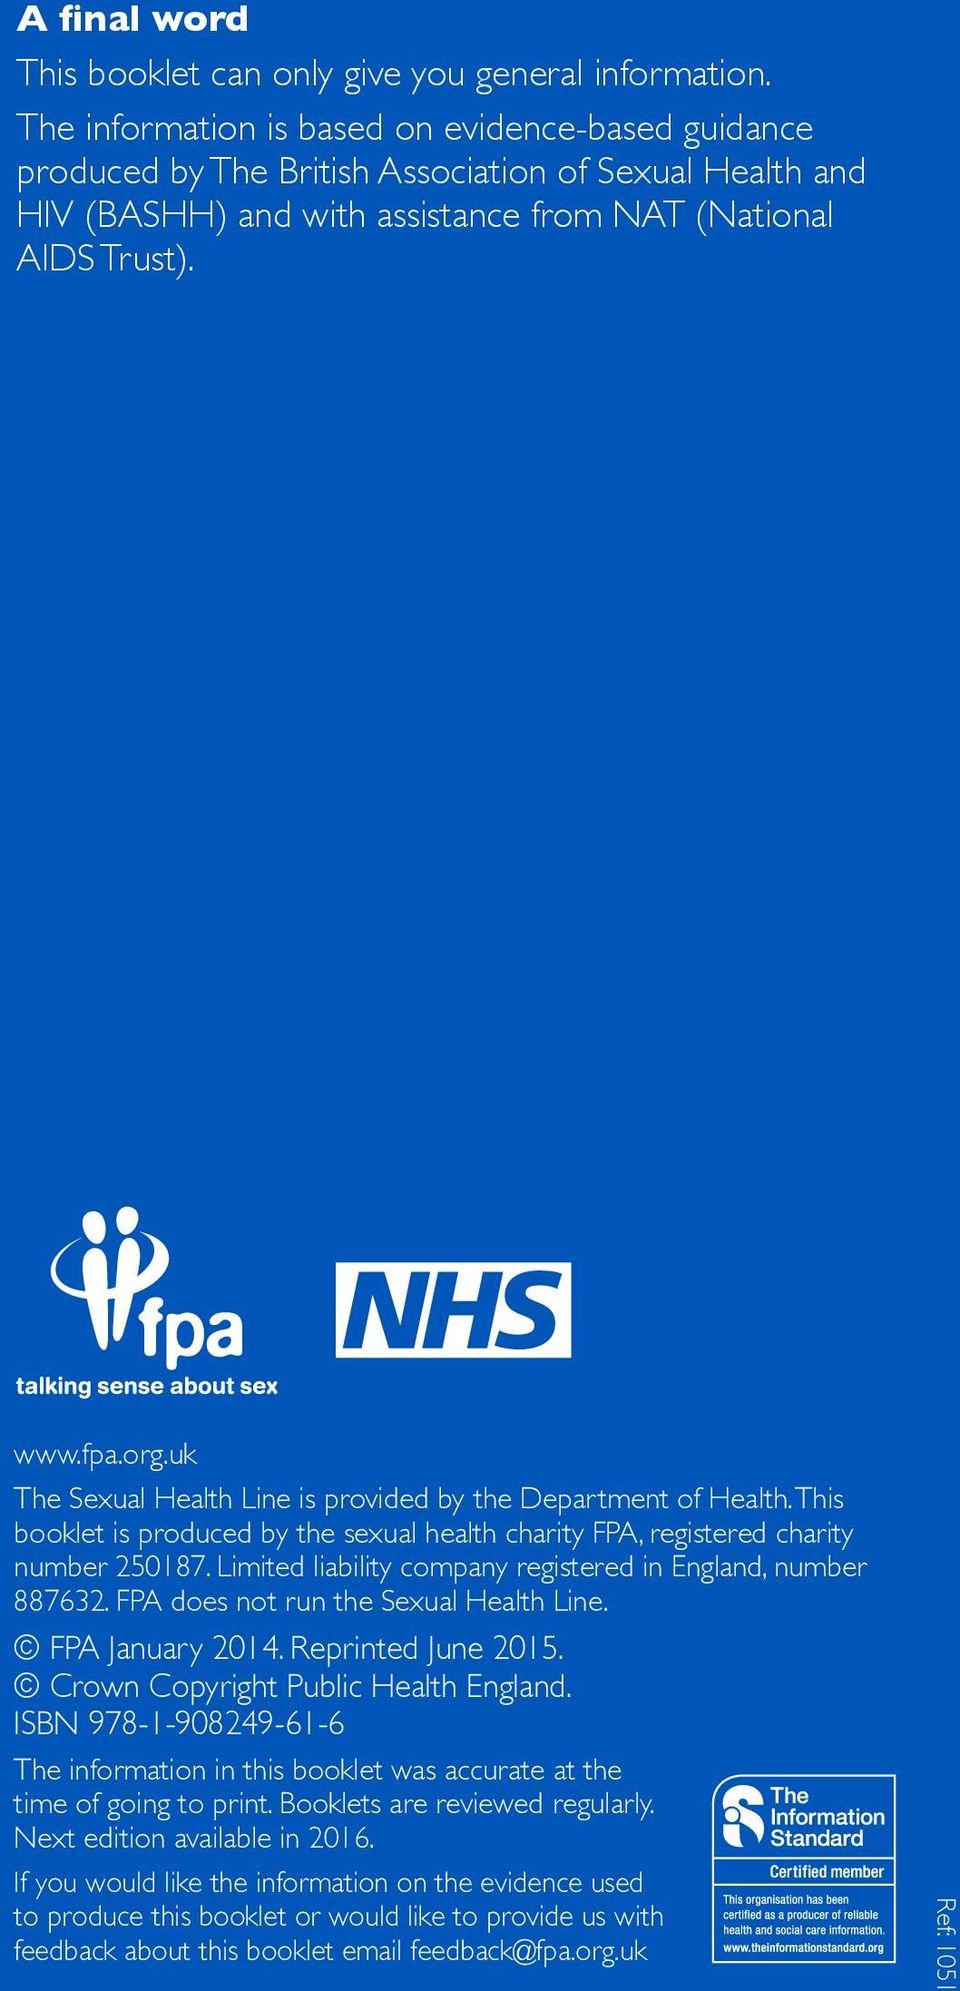 uk The Sexual Health Line is provided by the Department of Health. This booklet is produced by the sexual health charity FPA, registered charity number 250187.